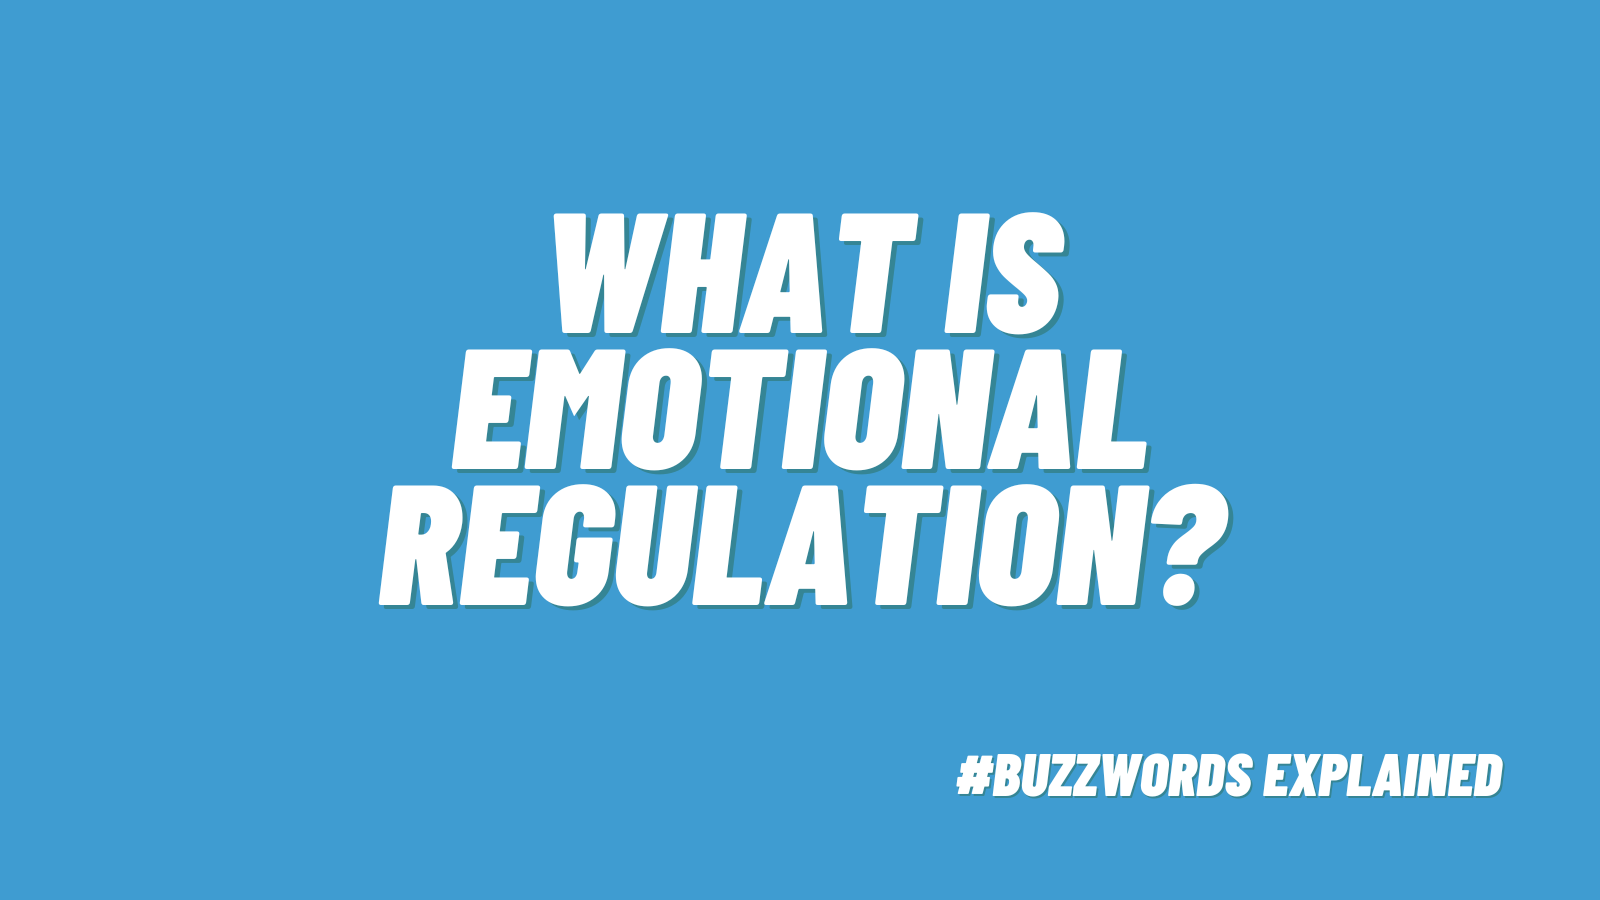 What is emotional regulation?